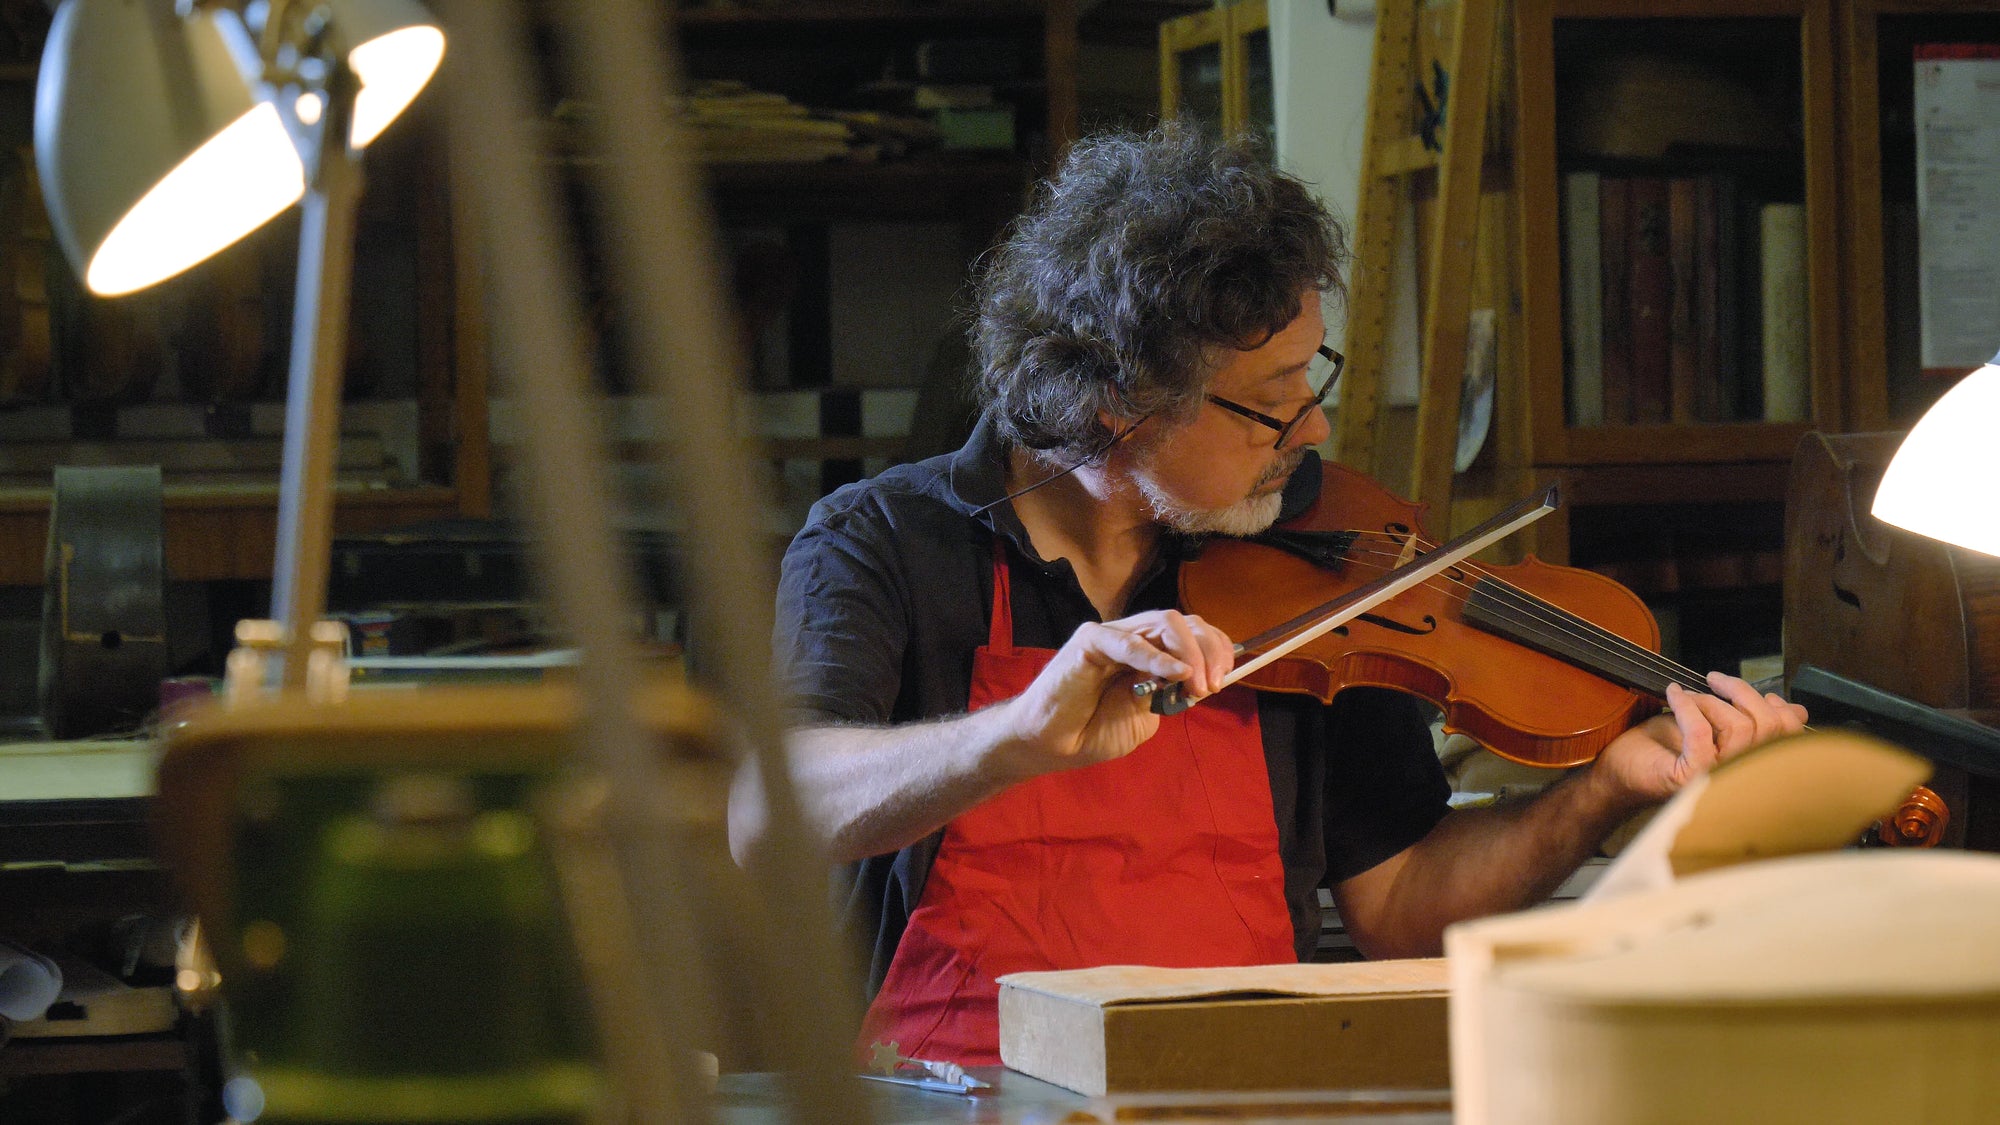 A man playing a violin in a workshop.